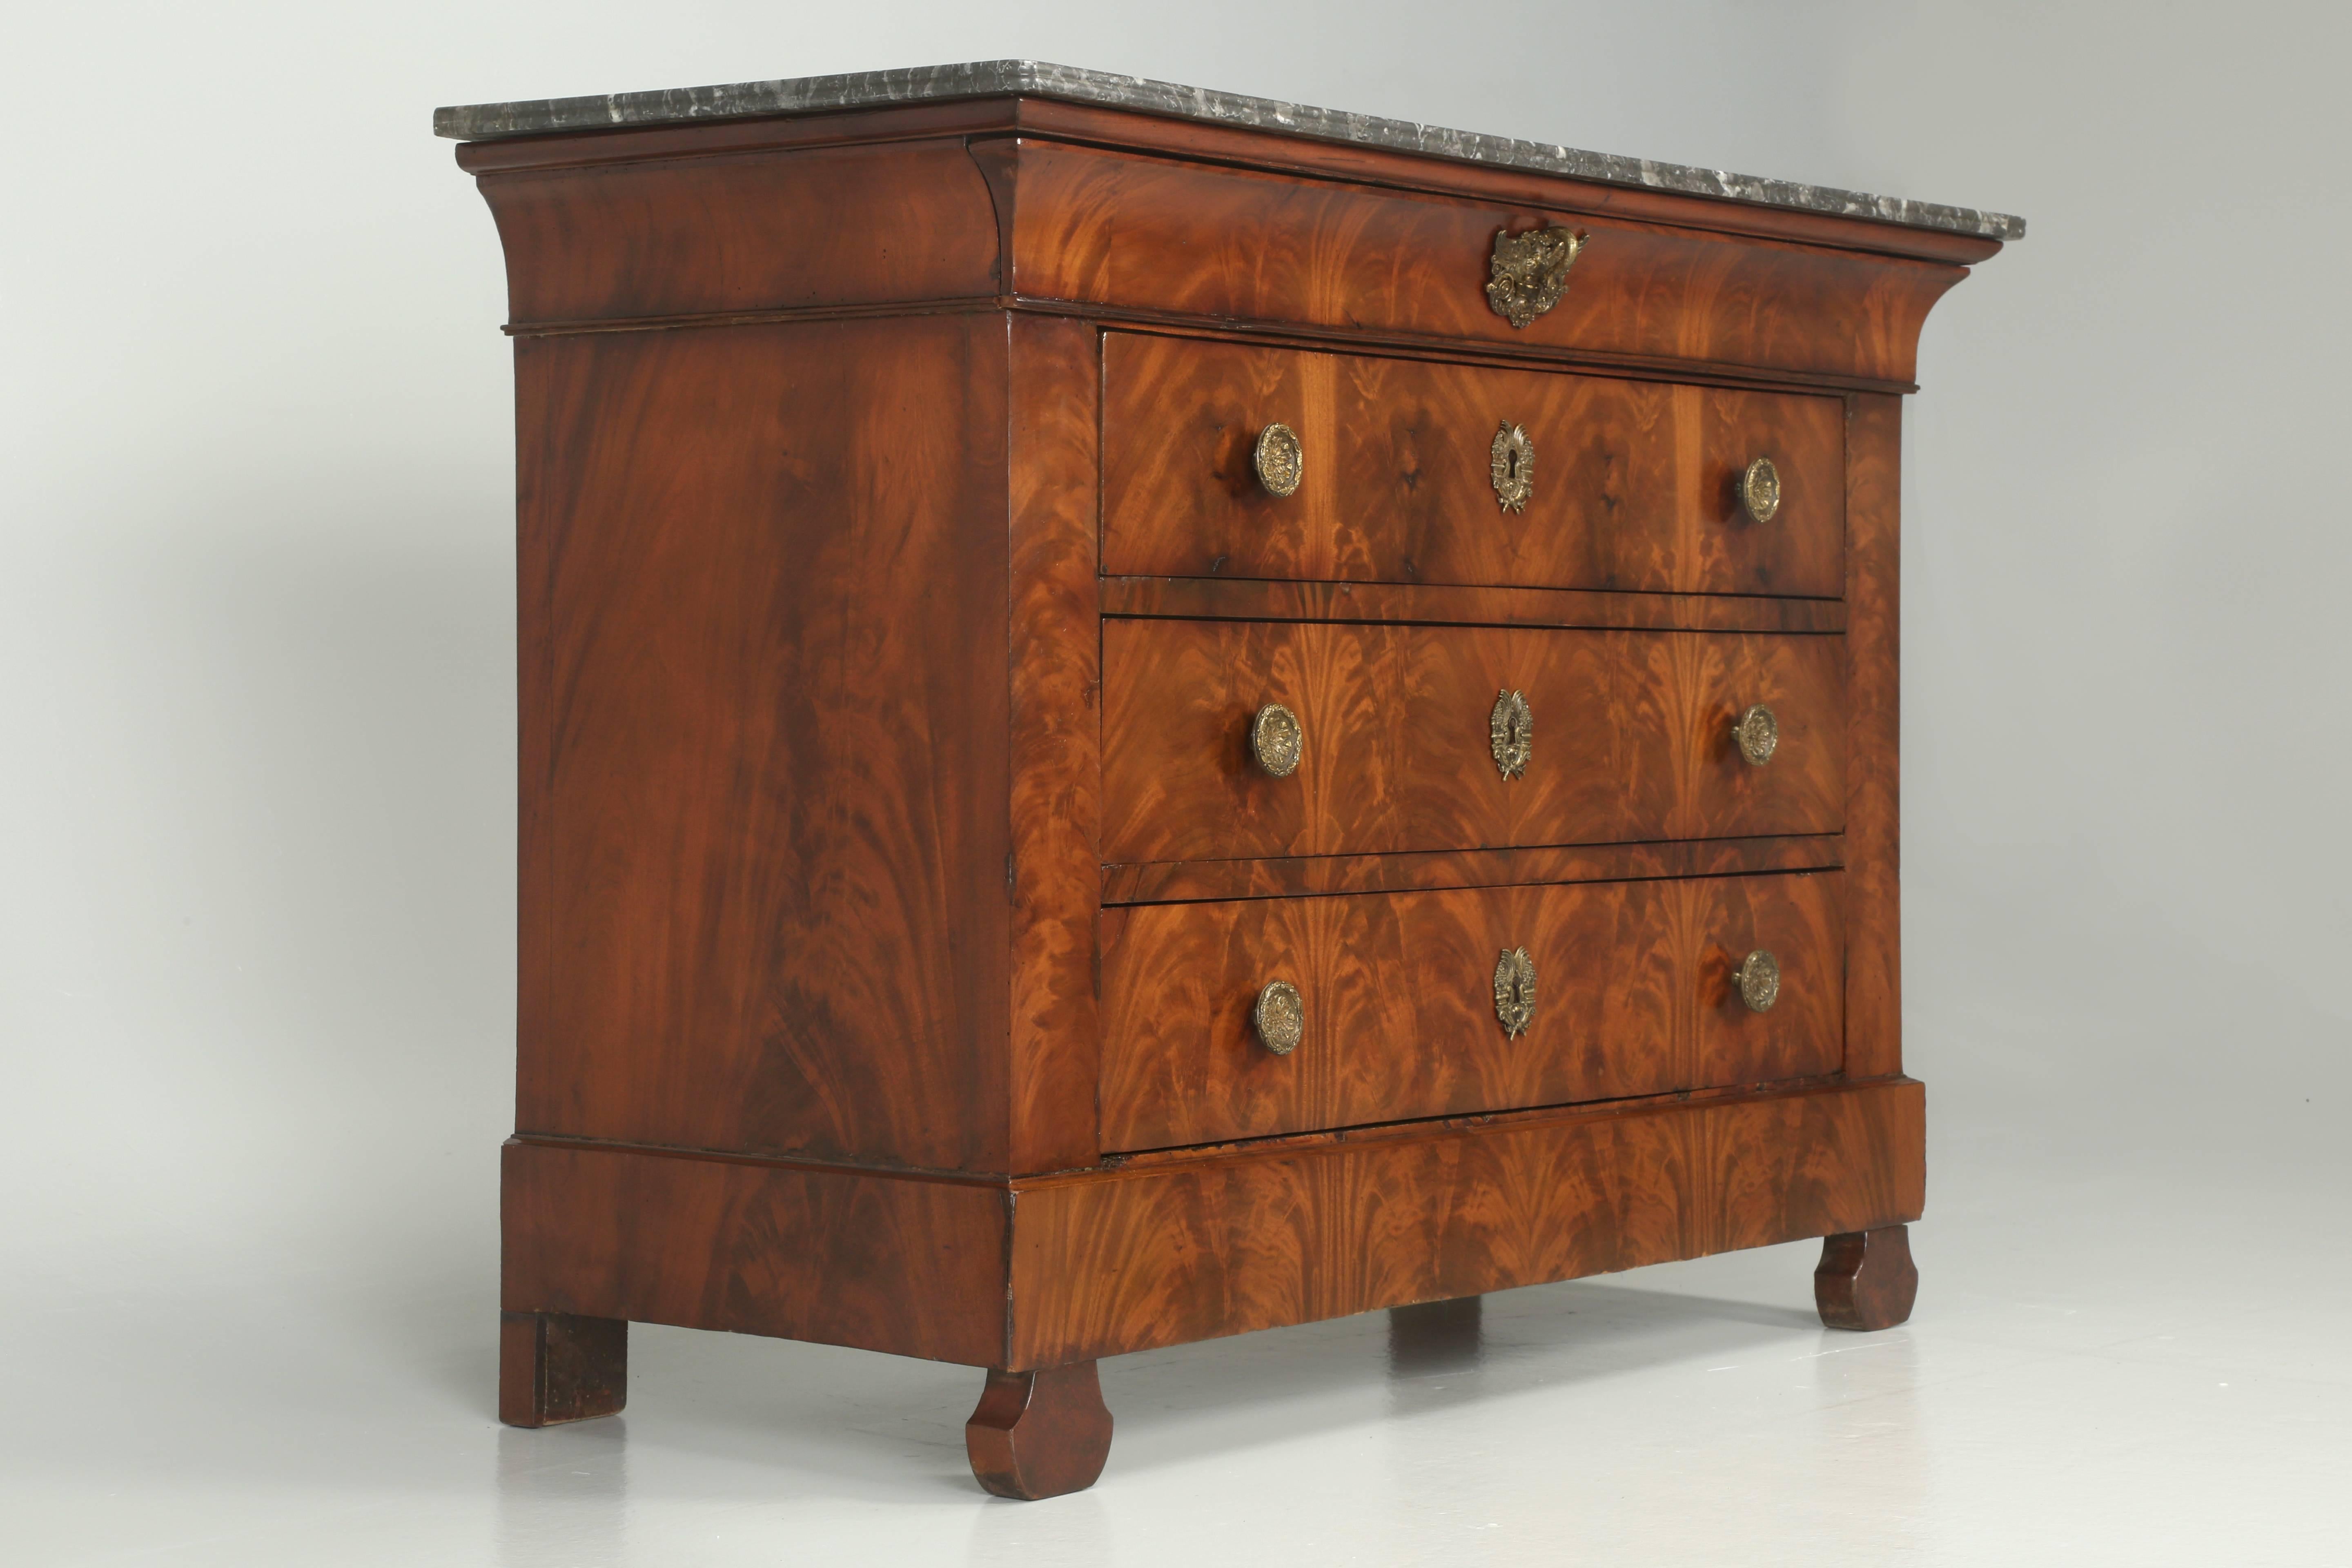 Antique French Commode or chest of drawers, done in a crotch mahogany book-matched veneer that was just gone through by our Old Plank finishing department. The rich color of the mahogany plays beautifully with the contrasting hardware. The upper